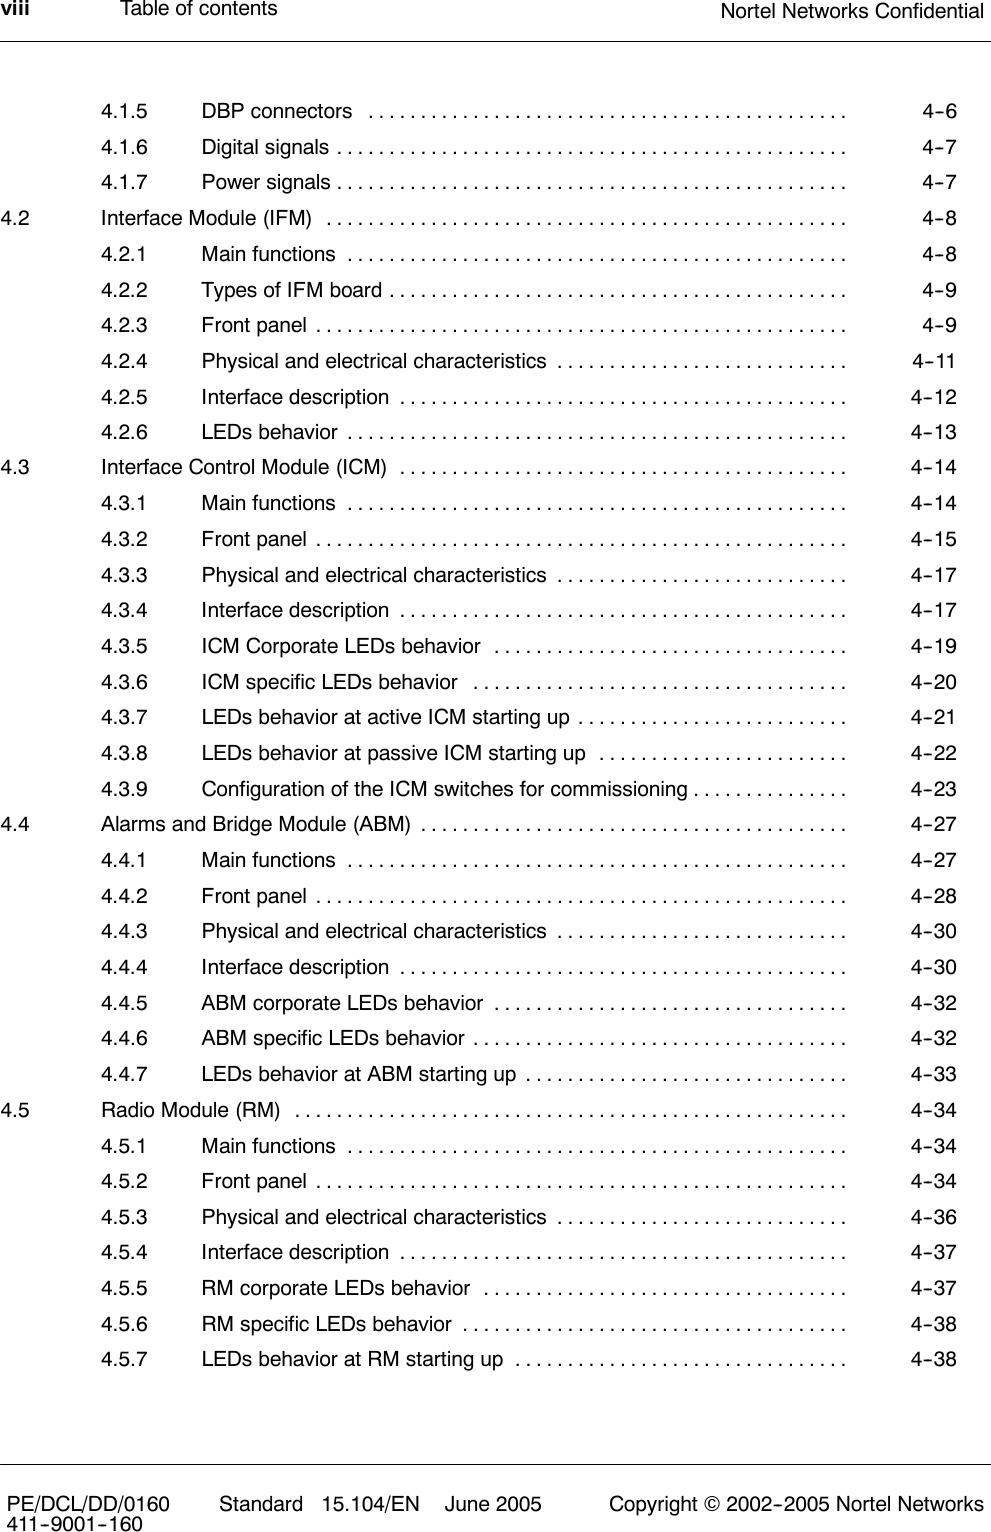 Table of contents Nortel Networks ConfidentialviiiPE/DCL/DD/0160411--9001--160 Standard 15.104/EN June 2005 Copyright ©2002--2005 Nortel Networks4.1.5 DBP connectors 4--6..............................................4.1.6 Digital signals 4--7.................................................4.1.7 Power signals 4--7.................................................4.2 Interface Module (IFM) 4--8..................................................4.2.1 Main functions 4--8................................................4.2.2 Types of IFM board 4--9............................................4.2.3 Front panel 4--9...................................................4.2.4 Physical and electrical characteristics 4--11............................4.2.5 Interface description 4--12...........................................4.2.6 LEDs behavior 4--13................................................4.3 Interface Control Module (ICM) 4--14...........................................4.3.1 Main functions 4--14................................................4.3.2 Front panel 4--15...................................................4.3.3 Physical and electrical characteristics 4--17............................4.3.4 Interface description 4--17...........................................4.3.5 ICM Corporate LEDs behavior 4--19..................................4.3.6 ICM specific LEDs behavior 4--20....................................4.3.7 LEDs behavior at active ICM starting up 4--21..........................4.3.8 LEDs behavior at passive ICM starting up 4--22........................4.3.9 Configuration of the ICM switches for commissioning 4--23...............4.4 Alarms and Bridge Module (ABM) 4--27.........................................4.4.1 Main functions 4--27................................................4.4.2 Front panel 4--28...................................................4.4.3 Physical and electrical characteristics 4--30............................4.4.4 Interface description 4--30...........................................4.4.5 ABM corporate LEDs behavior 4--32..................................4.4.6 ABM specific LEDs behavior 4--32....................................4.4.7 LEDs behavior at ABM starting up 4--33...............................4.5 Radio Module (RM) 4--34.....................................................4.5.1 Main functions 4--34................................................4.5.2 Front panel 4--34...................................................4.5.3 Physical and electrical characteristics 4--36............................4.5.4 Interface description 4--37...........................................4.5.5 RM corporate LEDs behavior 4--37...................................4.5.6 RM specific LEDs behavior 4--38.....................................4.5.7 LEDs behavior at RM starting up 4--38................................